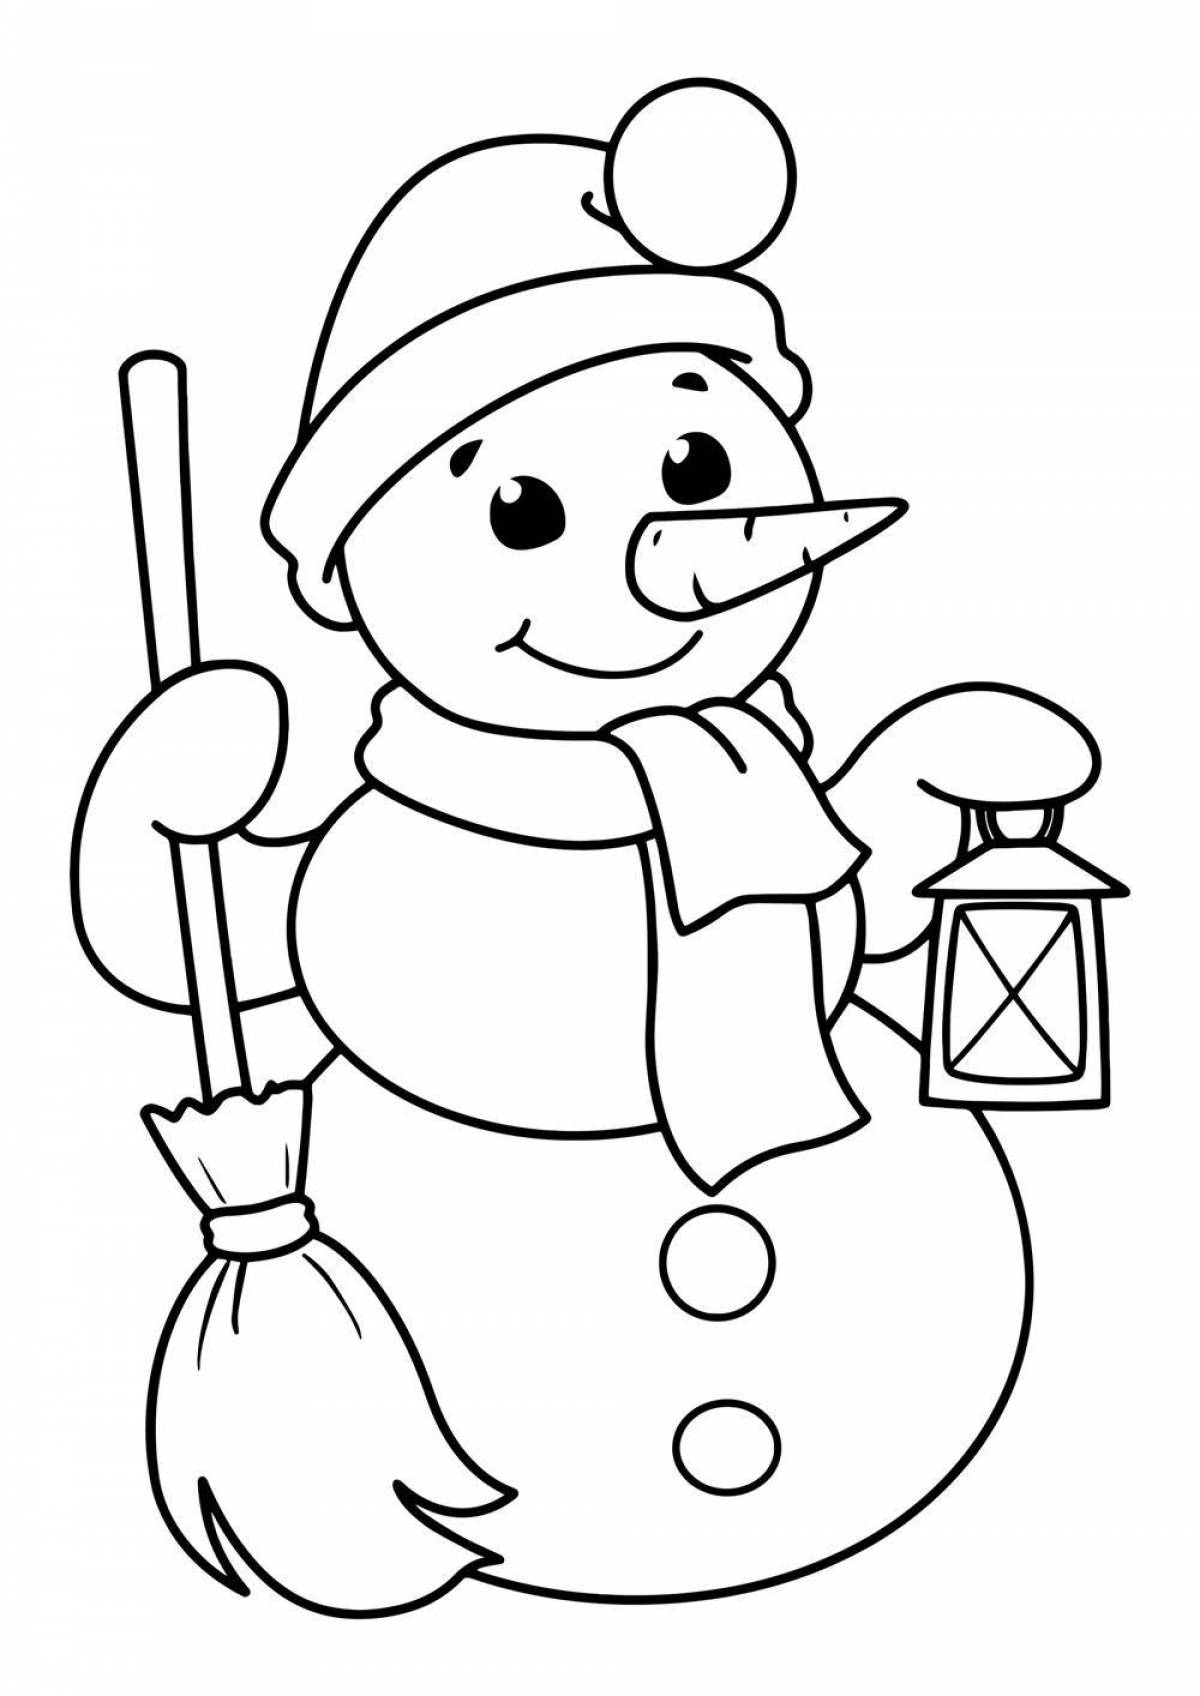 Colorful funny snowman coloring book for kids